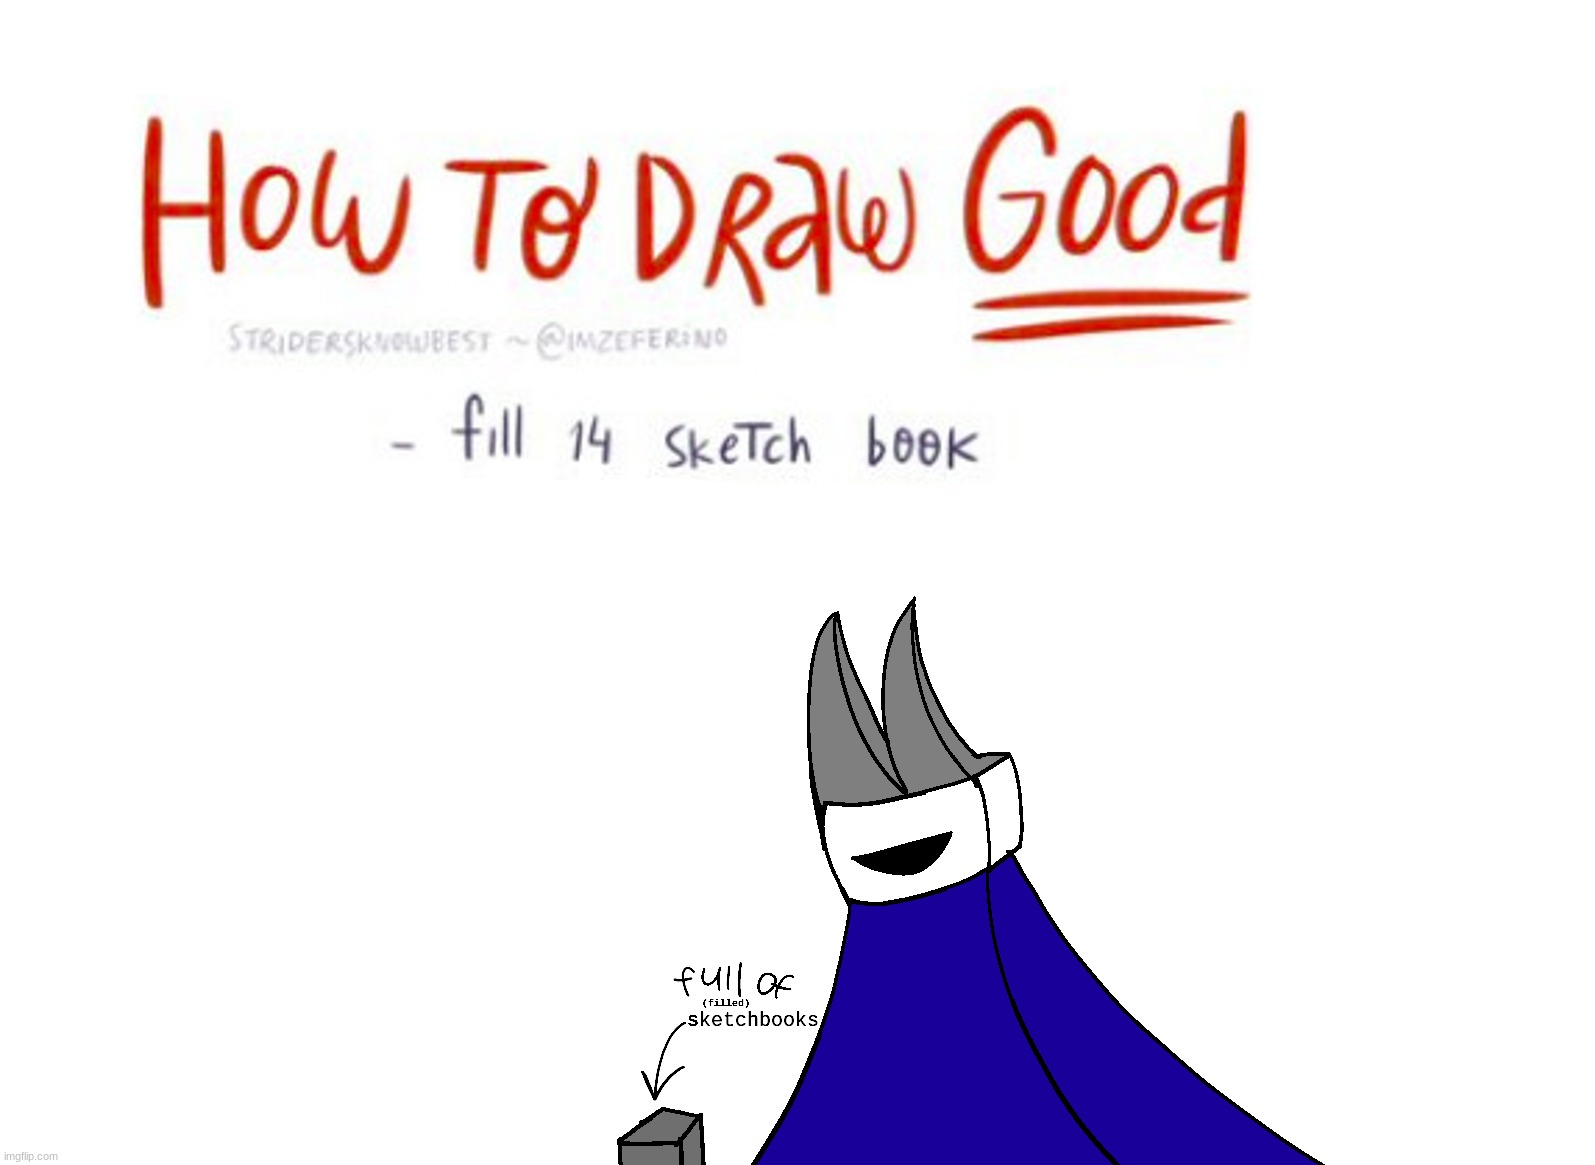 How To Draw Good [By Shade] | made w/ Imgflip meme maker